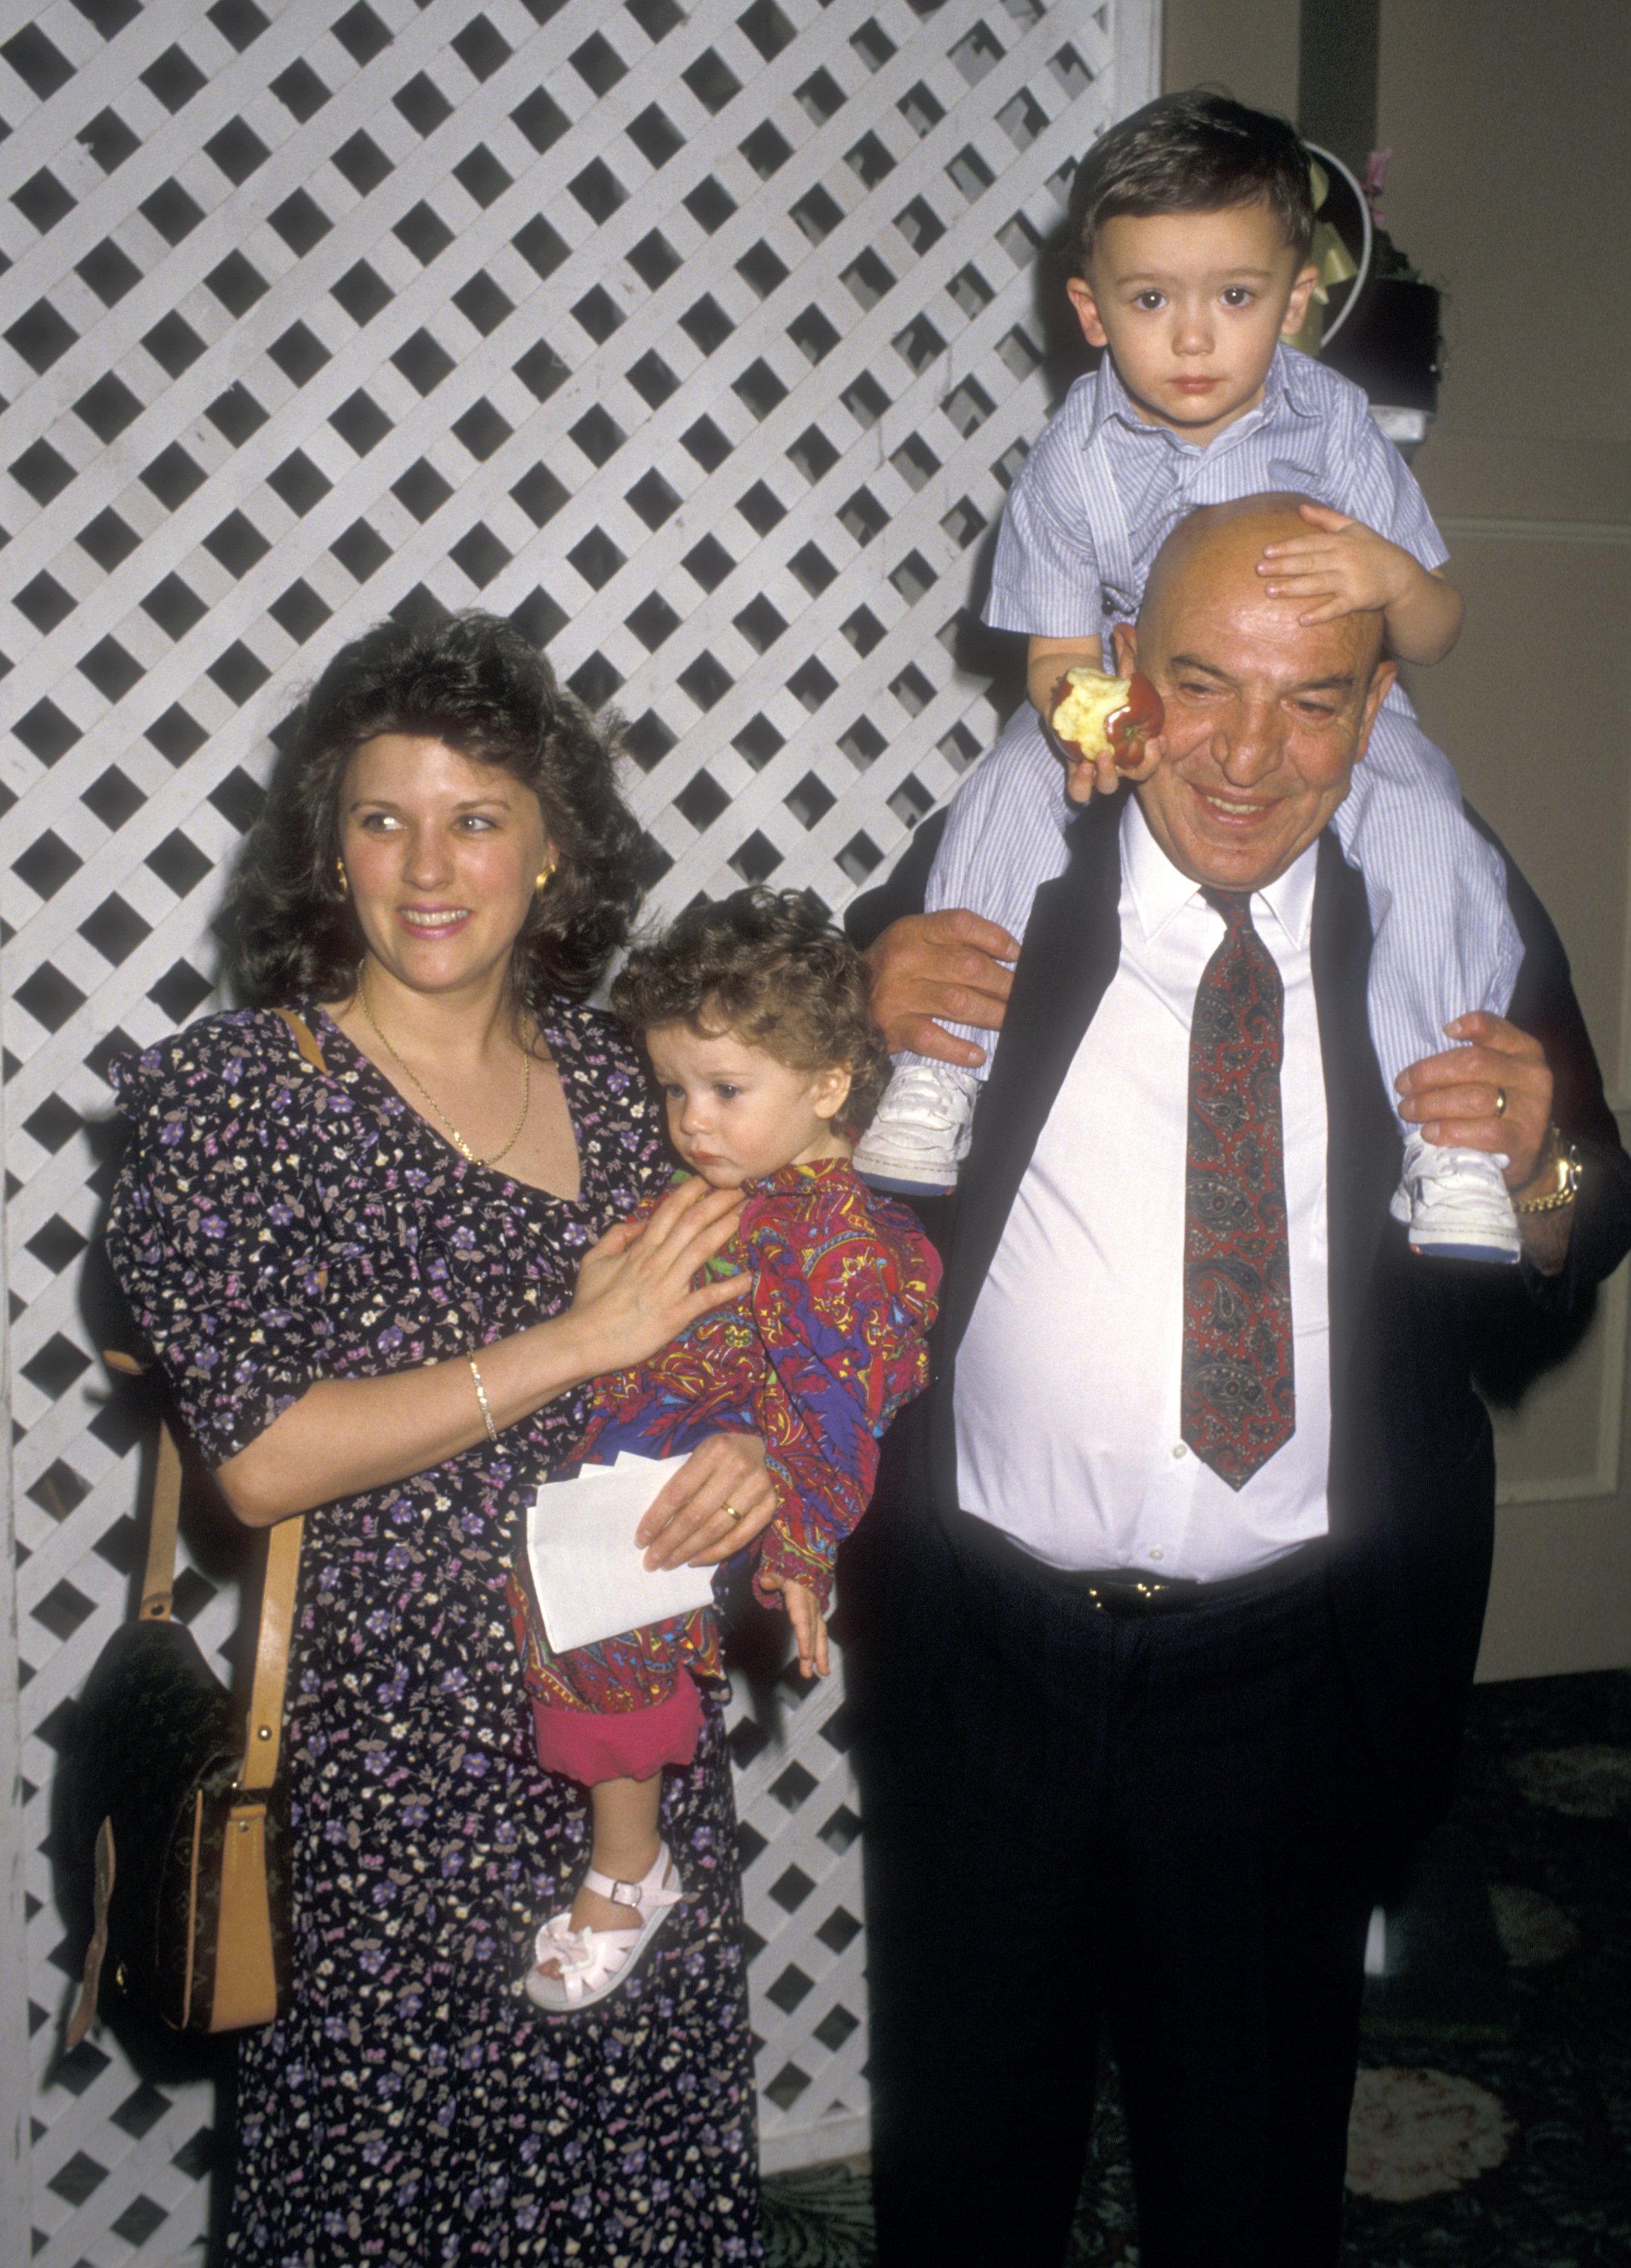 Actor Telly Savalas, wife Julie Savalas, son Christian Savalas and daughter Ariana Savalas attend the Young Musicians Foundation's Seventh Annual Celebrity Mother/Daughter Fashion Show on March 24, 1988 at Beverly Hilton Hotel in California. | Source: Getty Images